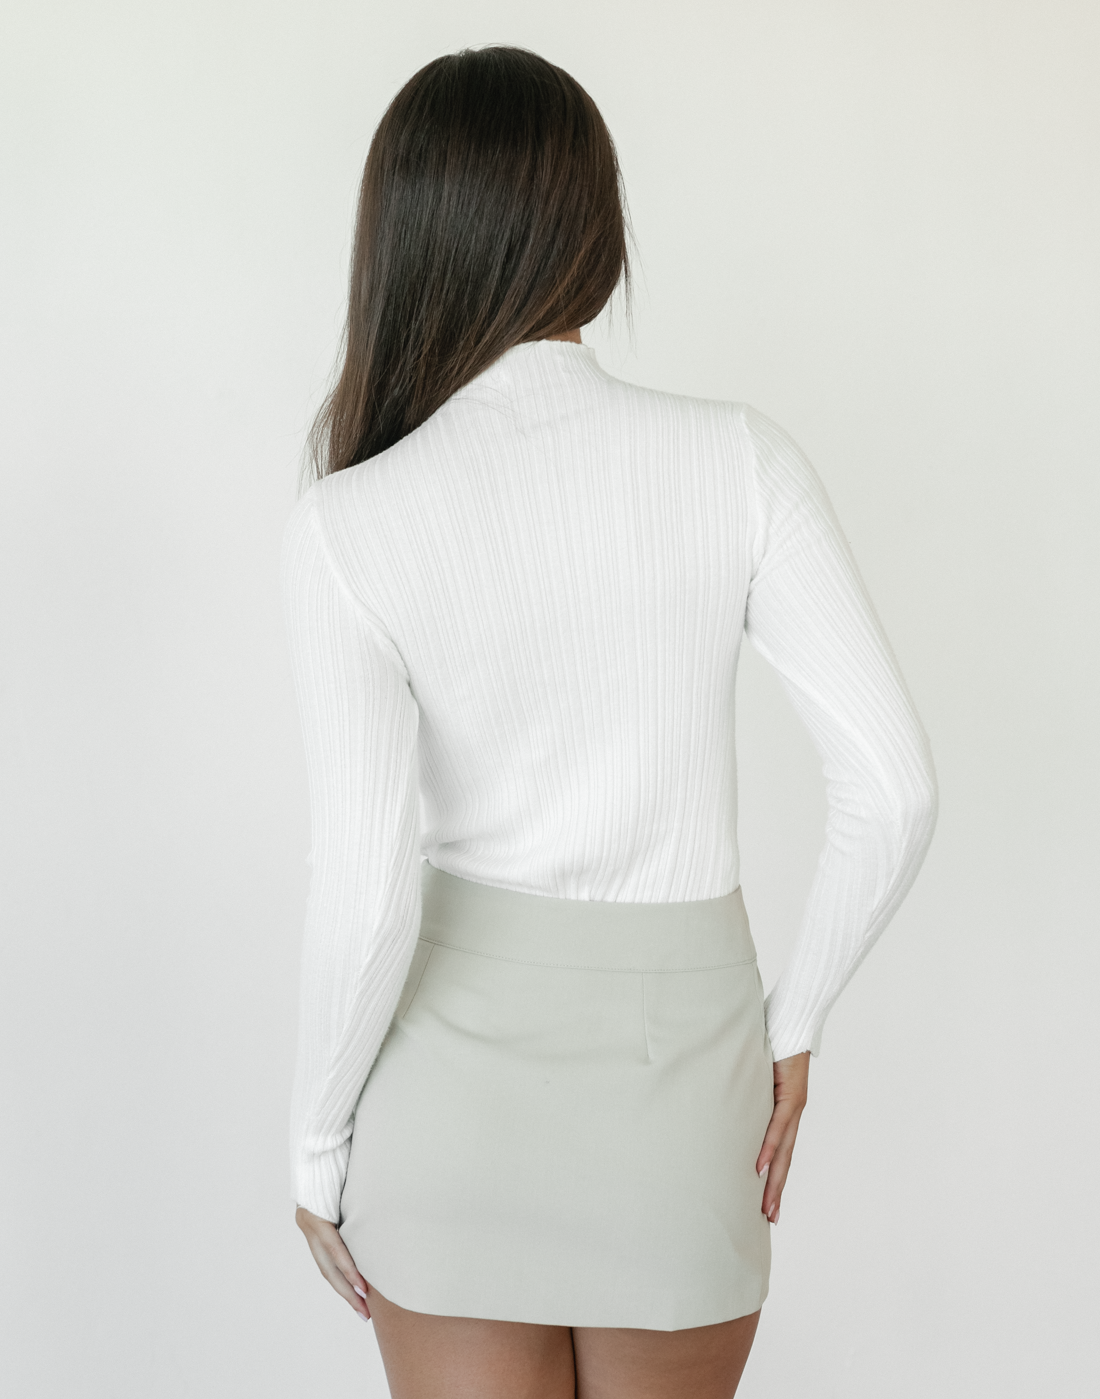  Kirsten Long Sleeve Top (White) - White Knit Long Sleeve Top - Women's Top - Charcoal Clothing